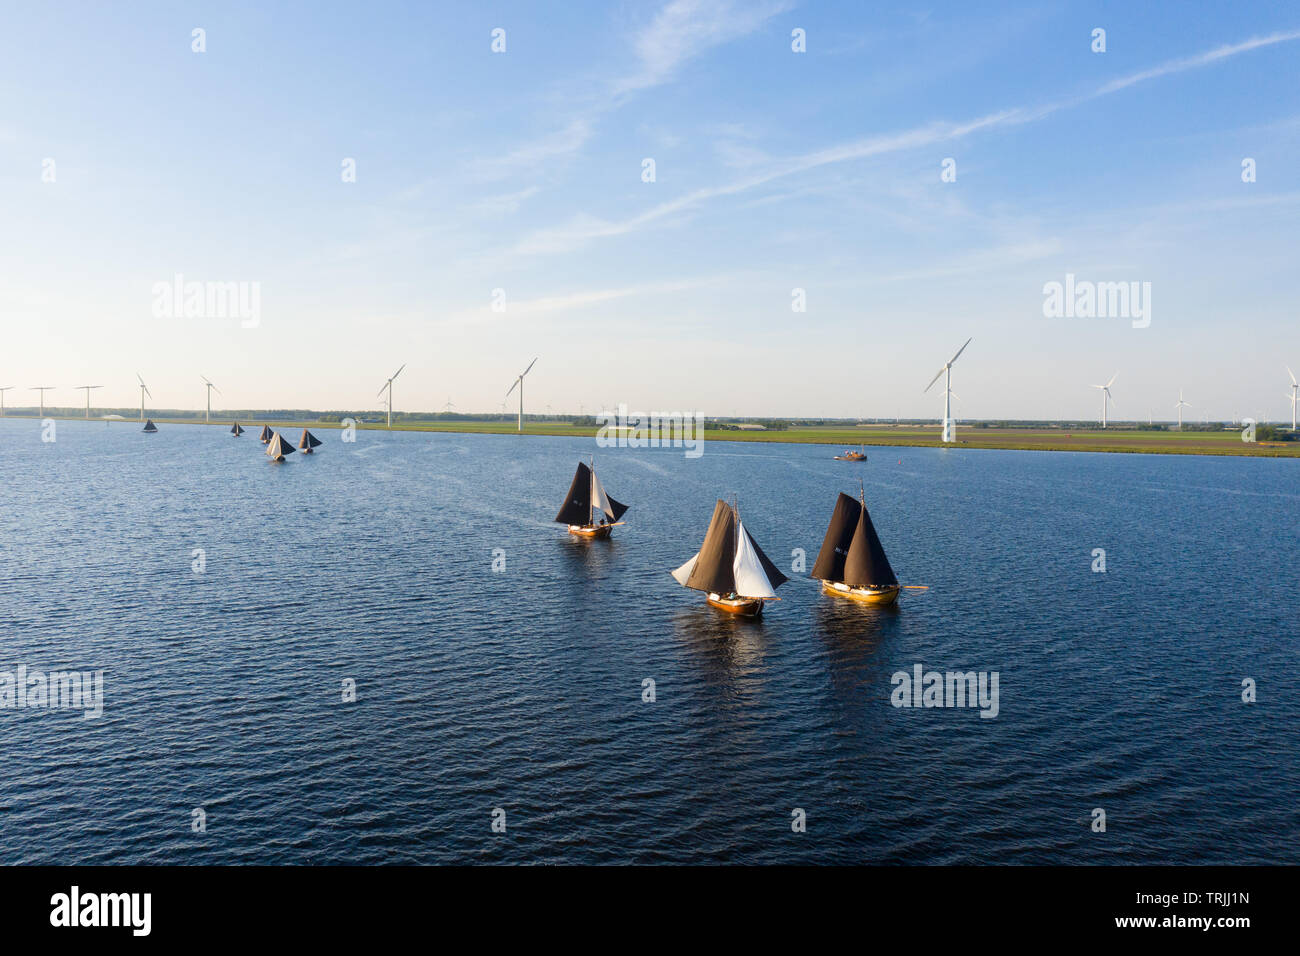 Aerial of typical Dutch blunter ships with on the background fishers village Spakenburg, The Netherlands Stock Photo